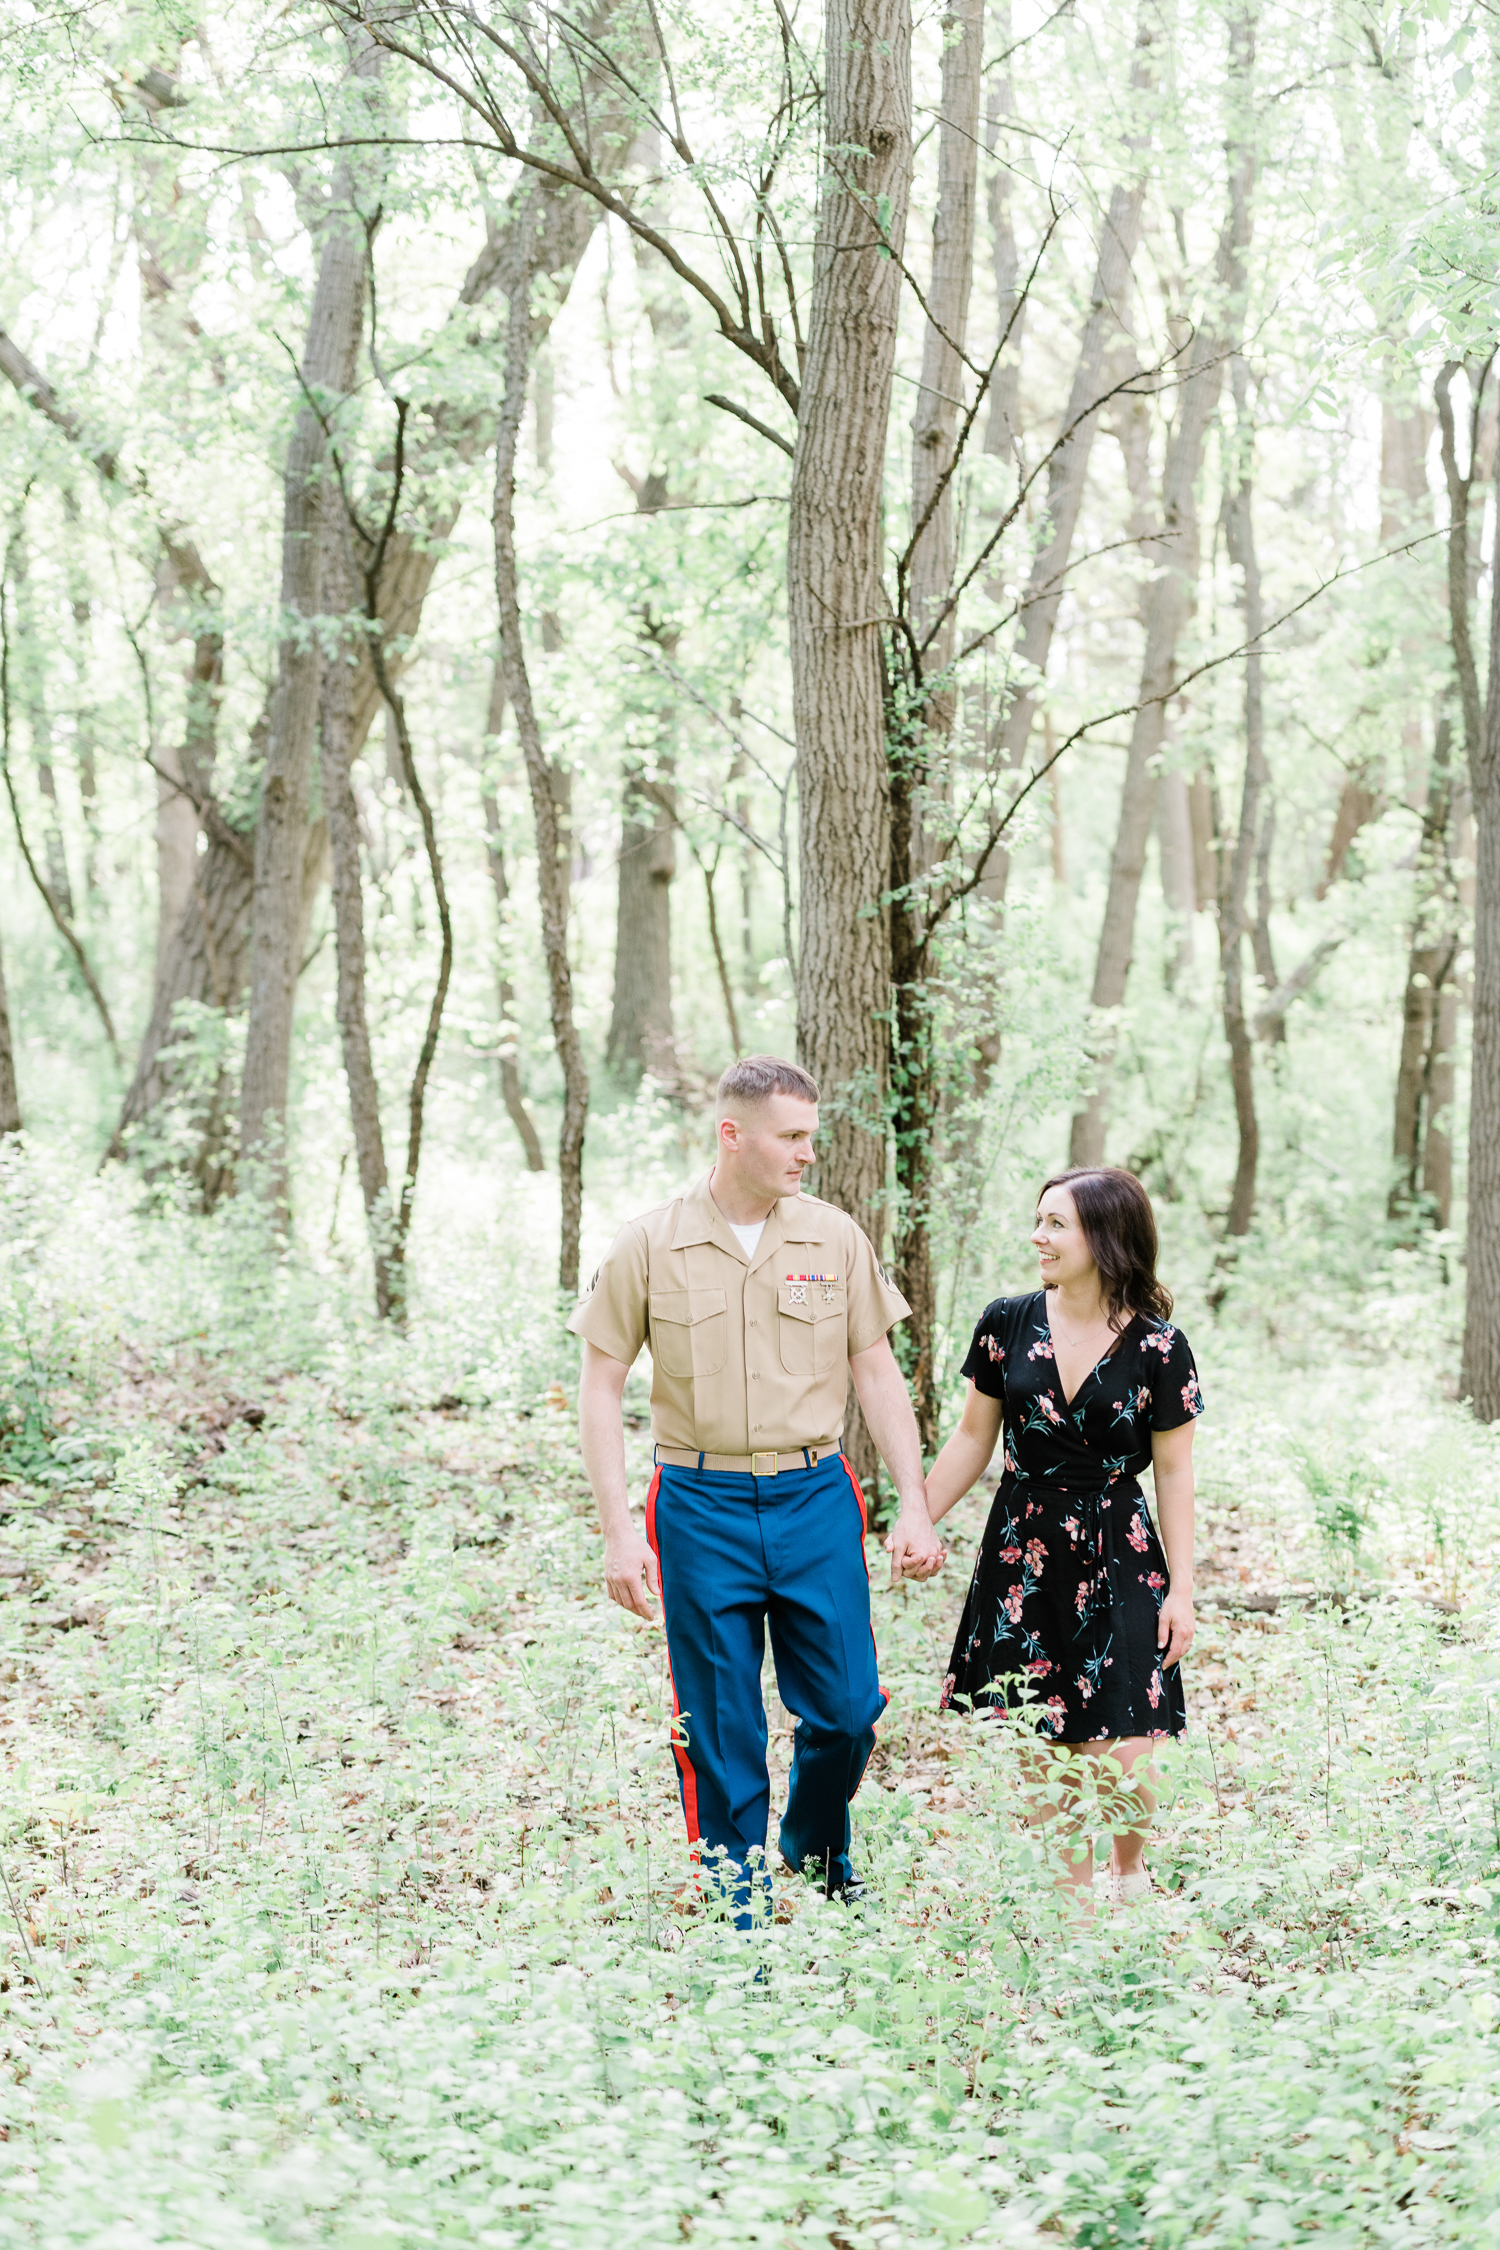 Girl in black floral dress and guy in military uniform hold hands while walking in the park